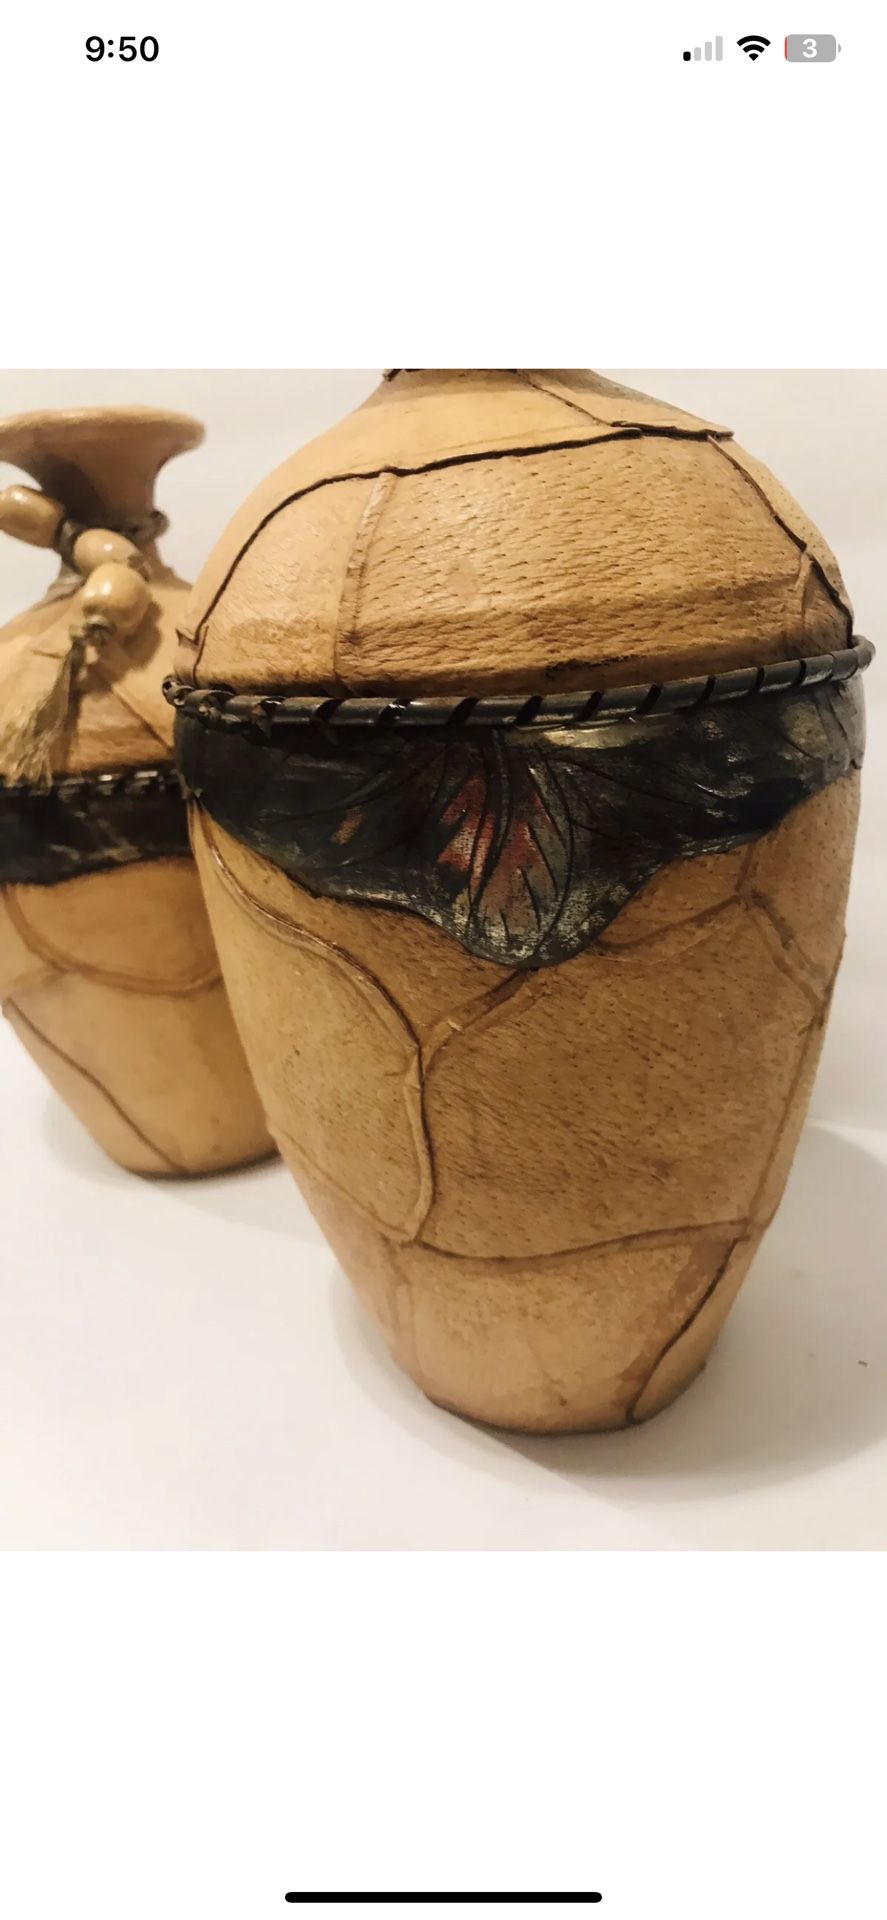 Set Of Two Vintage Leather Wrapped Vases Vintage Farmhouse Rustic Vases 11”,9”.  Beautiful and stunning pair of rustic vases, leather wrapped with met